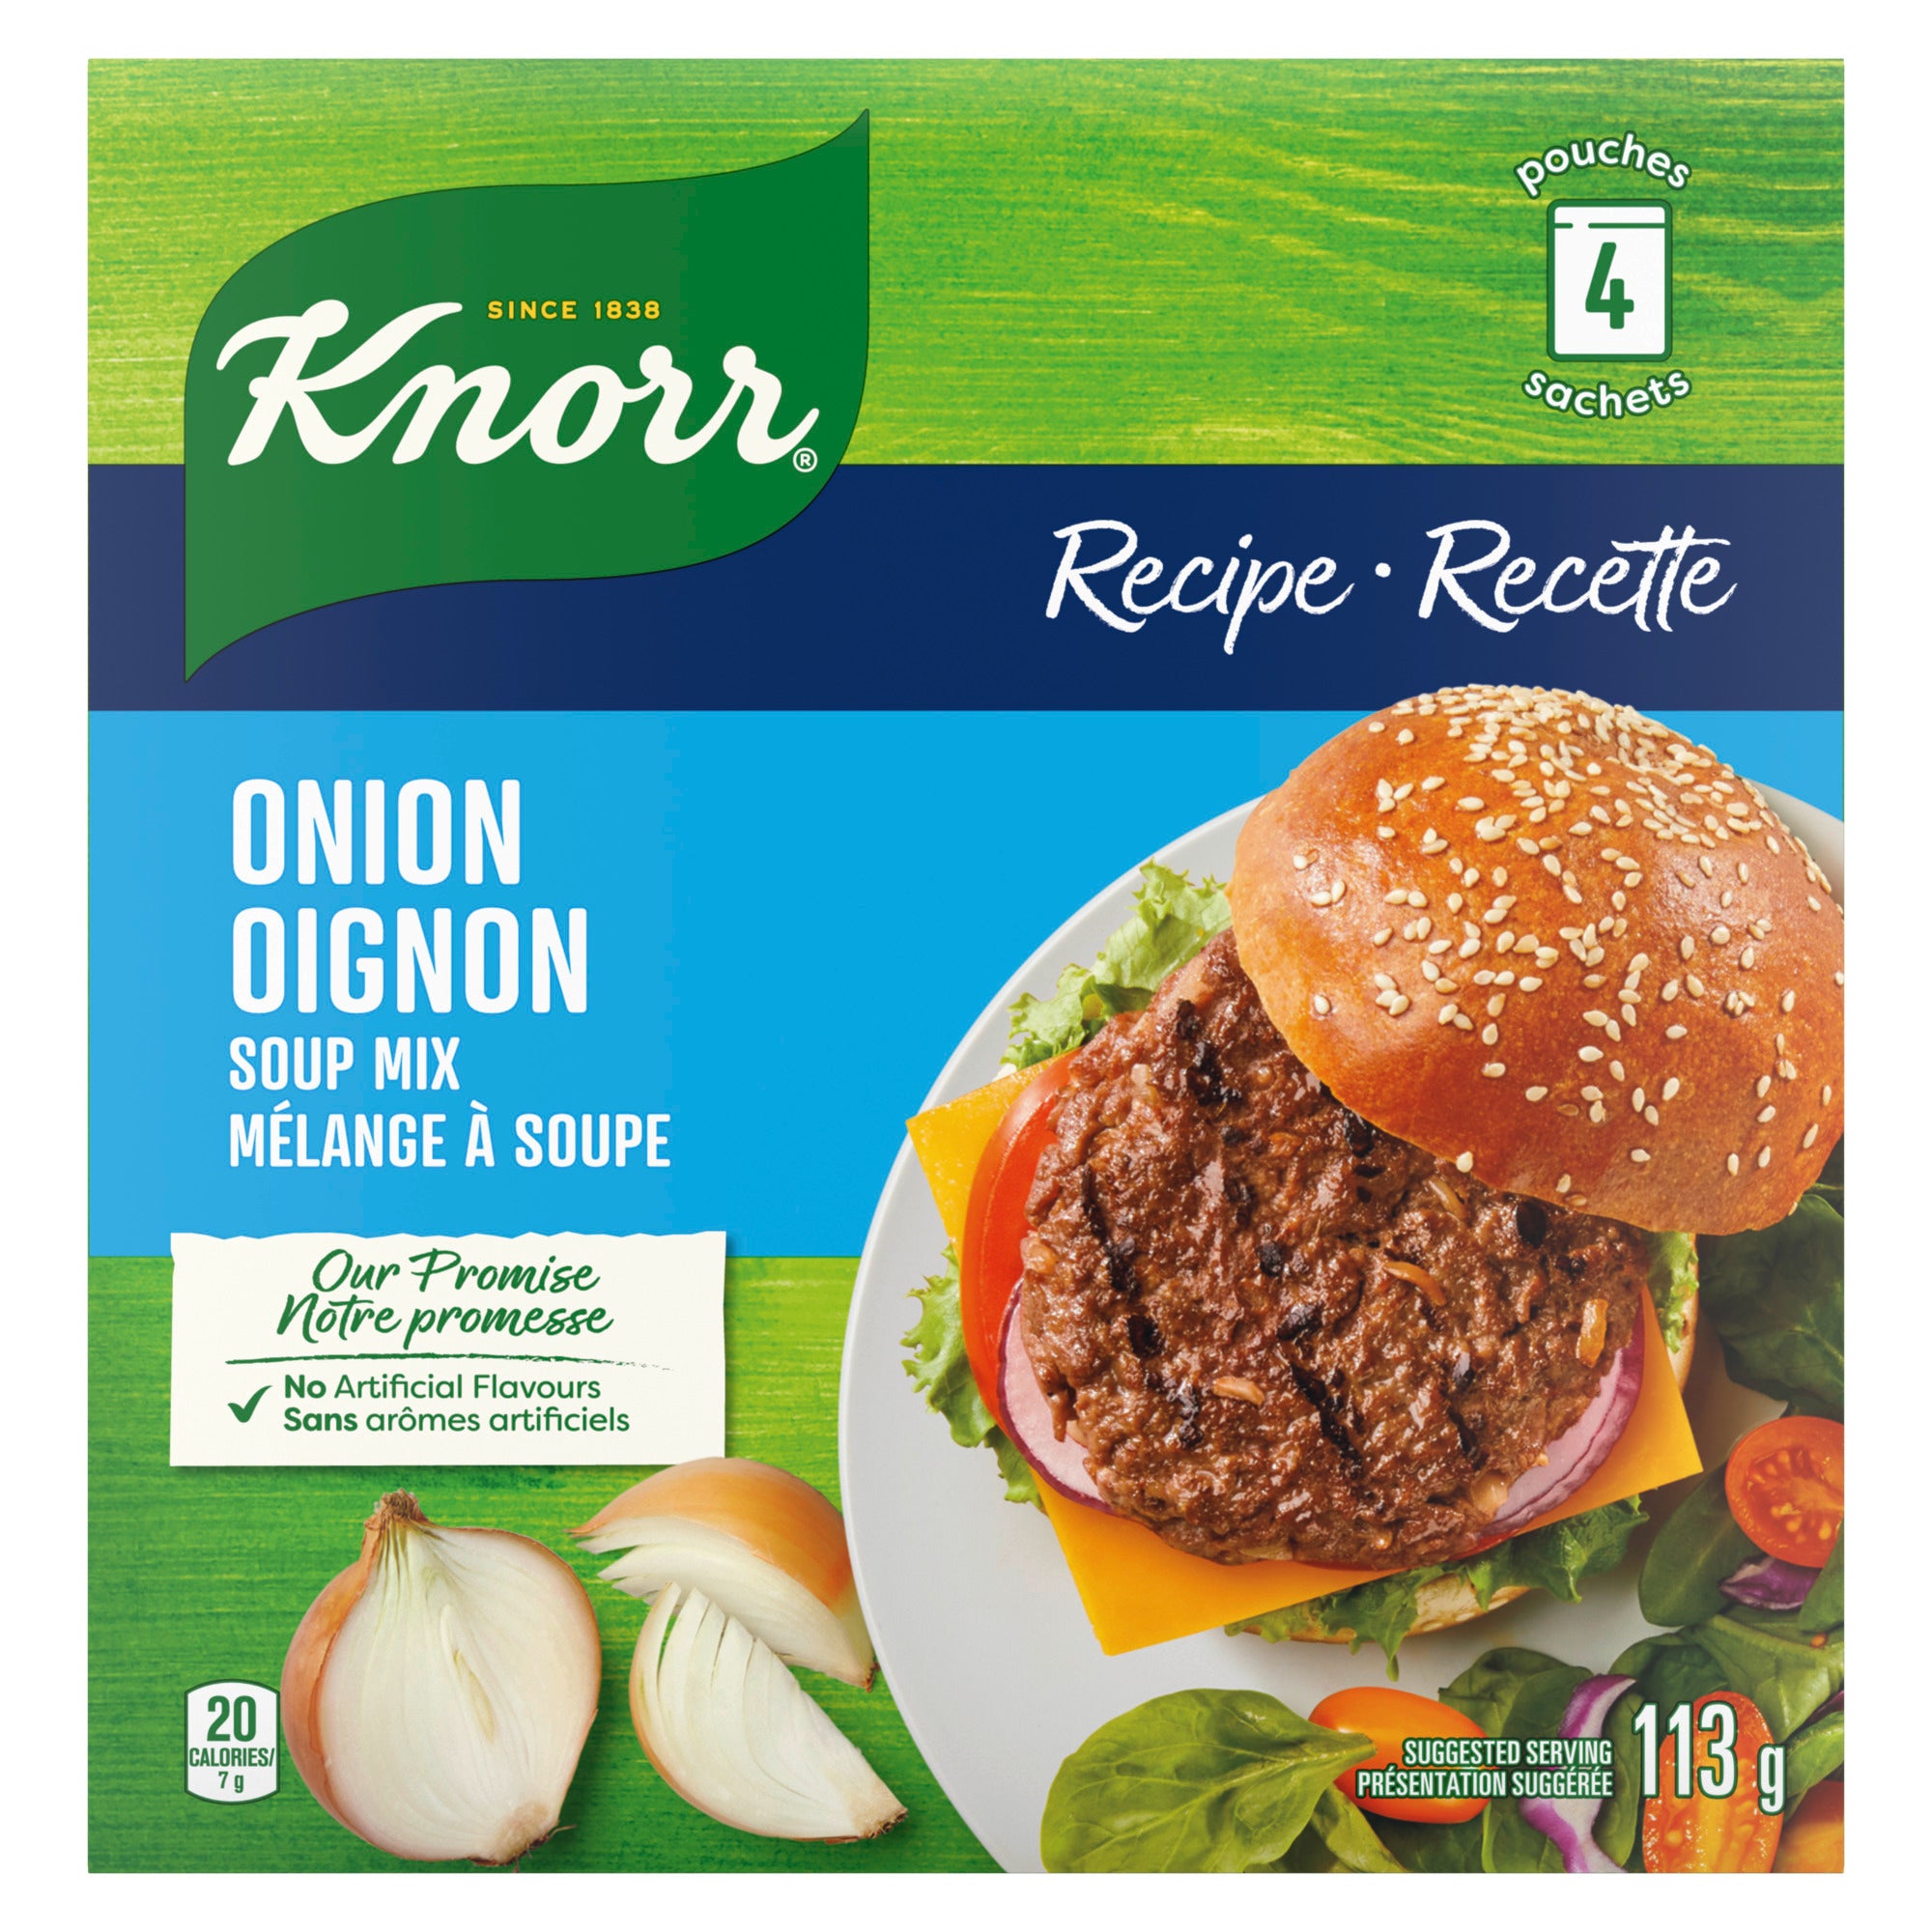 Showing the front angle view of the green Knorr® Recipe Onion Soup Mix 113g product packaging.